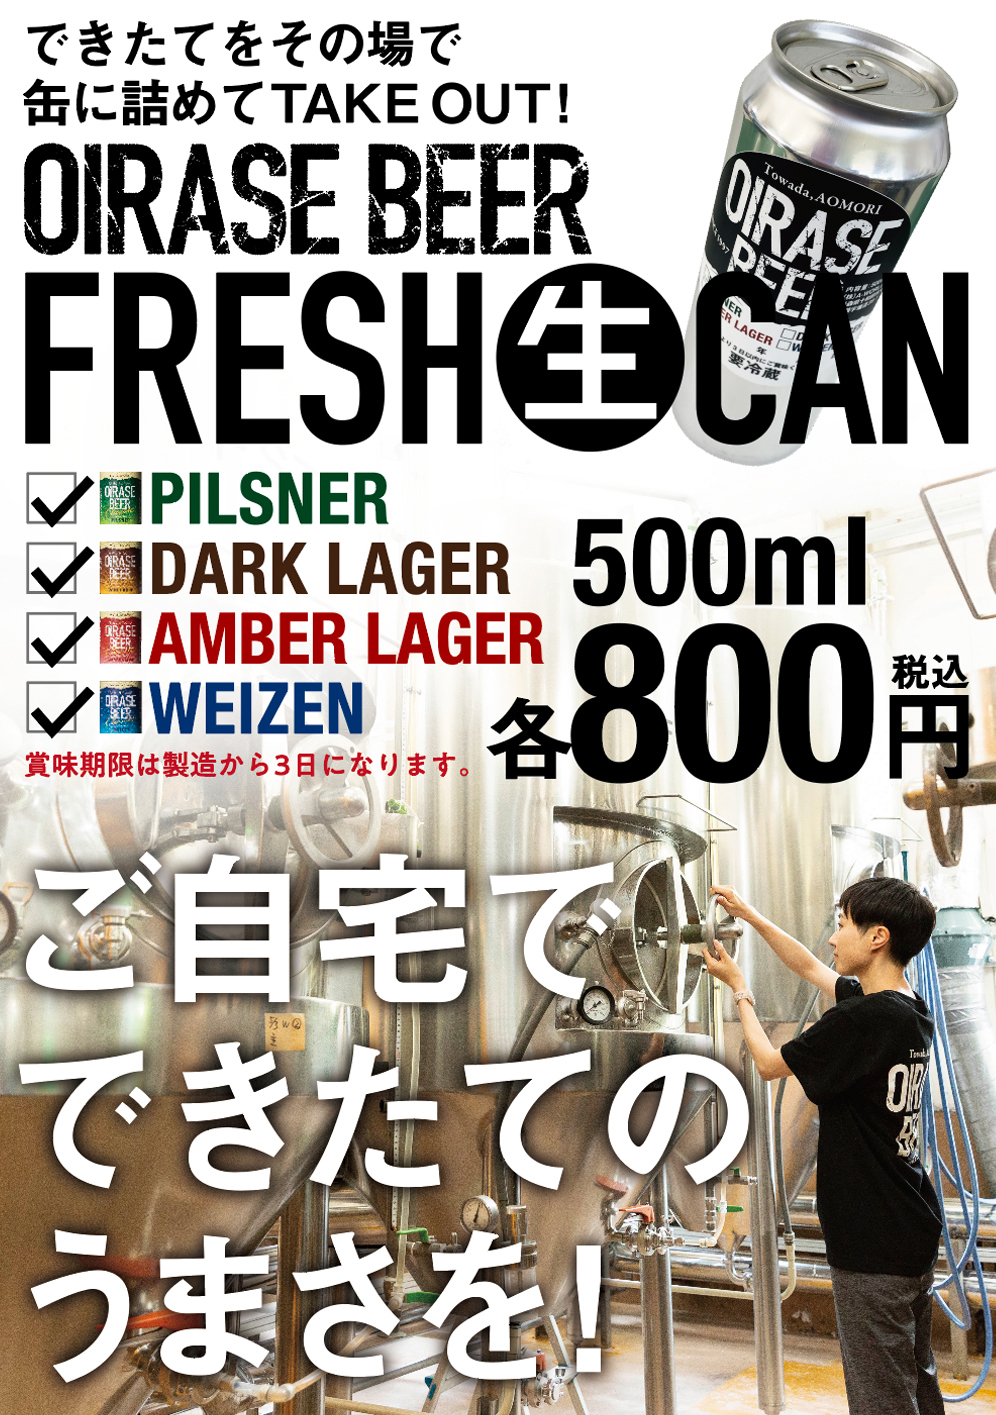 OIRASE BEER FRESH CAN